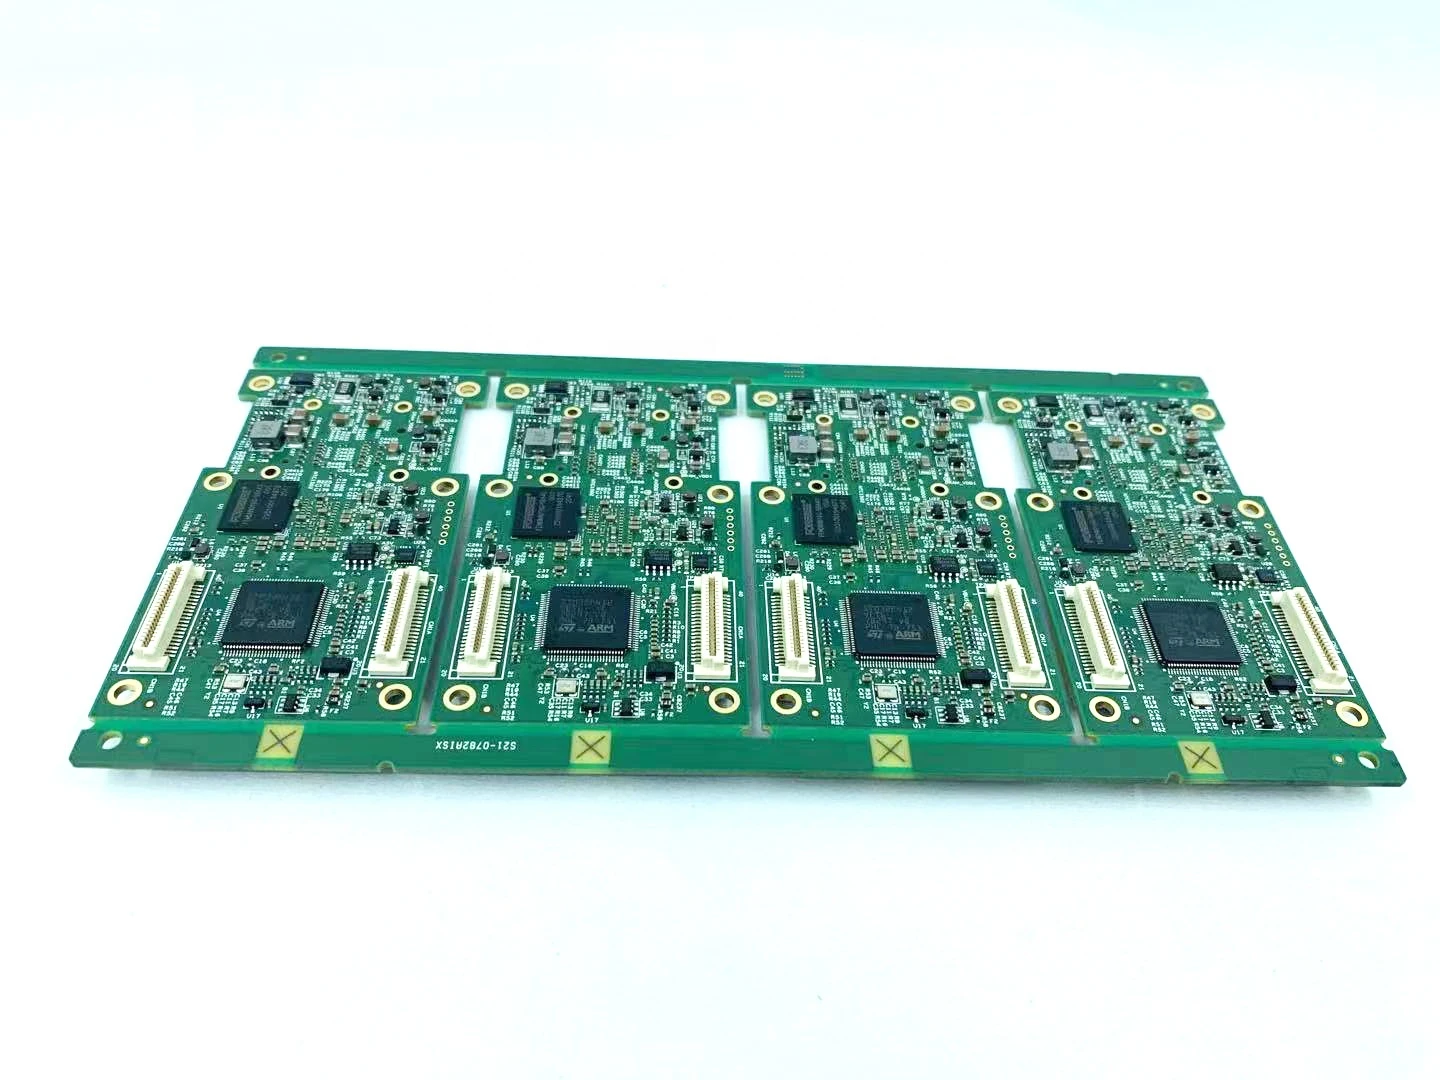 OEM 1-40 layers double-sided pcb manufactur Service Keyboard PCBA Board SMT Finished product assembly